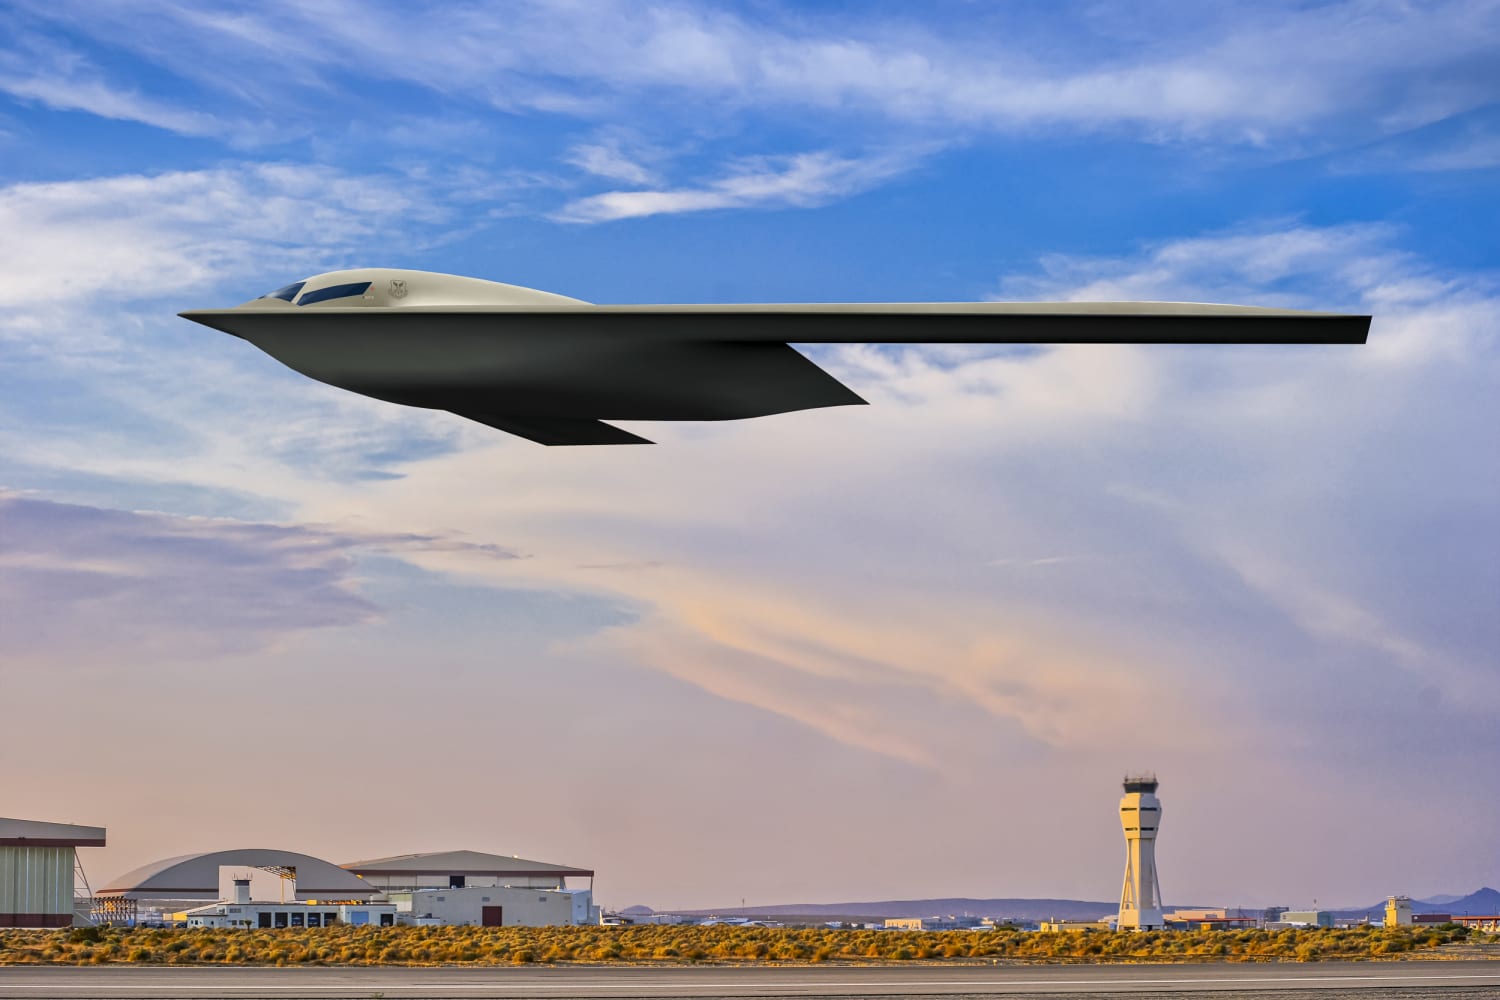 The US flies nuclear-capable bombers in a fresh show of force